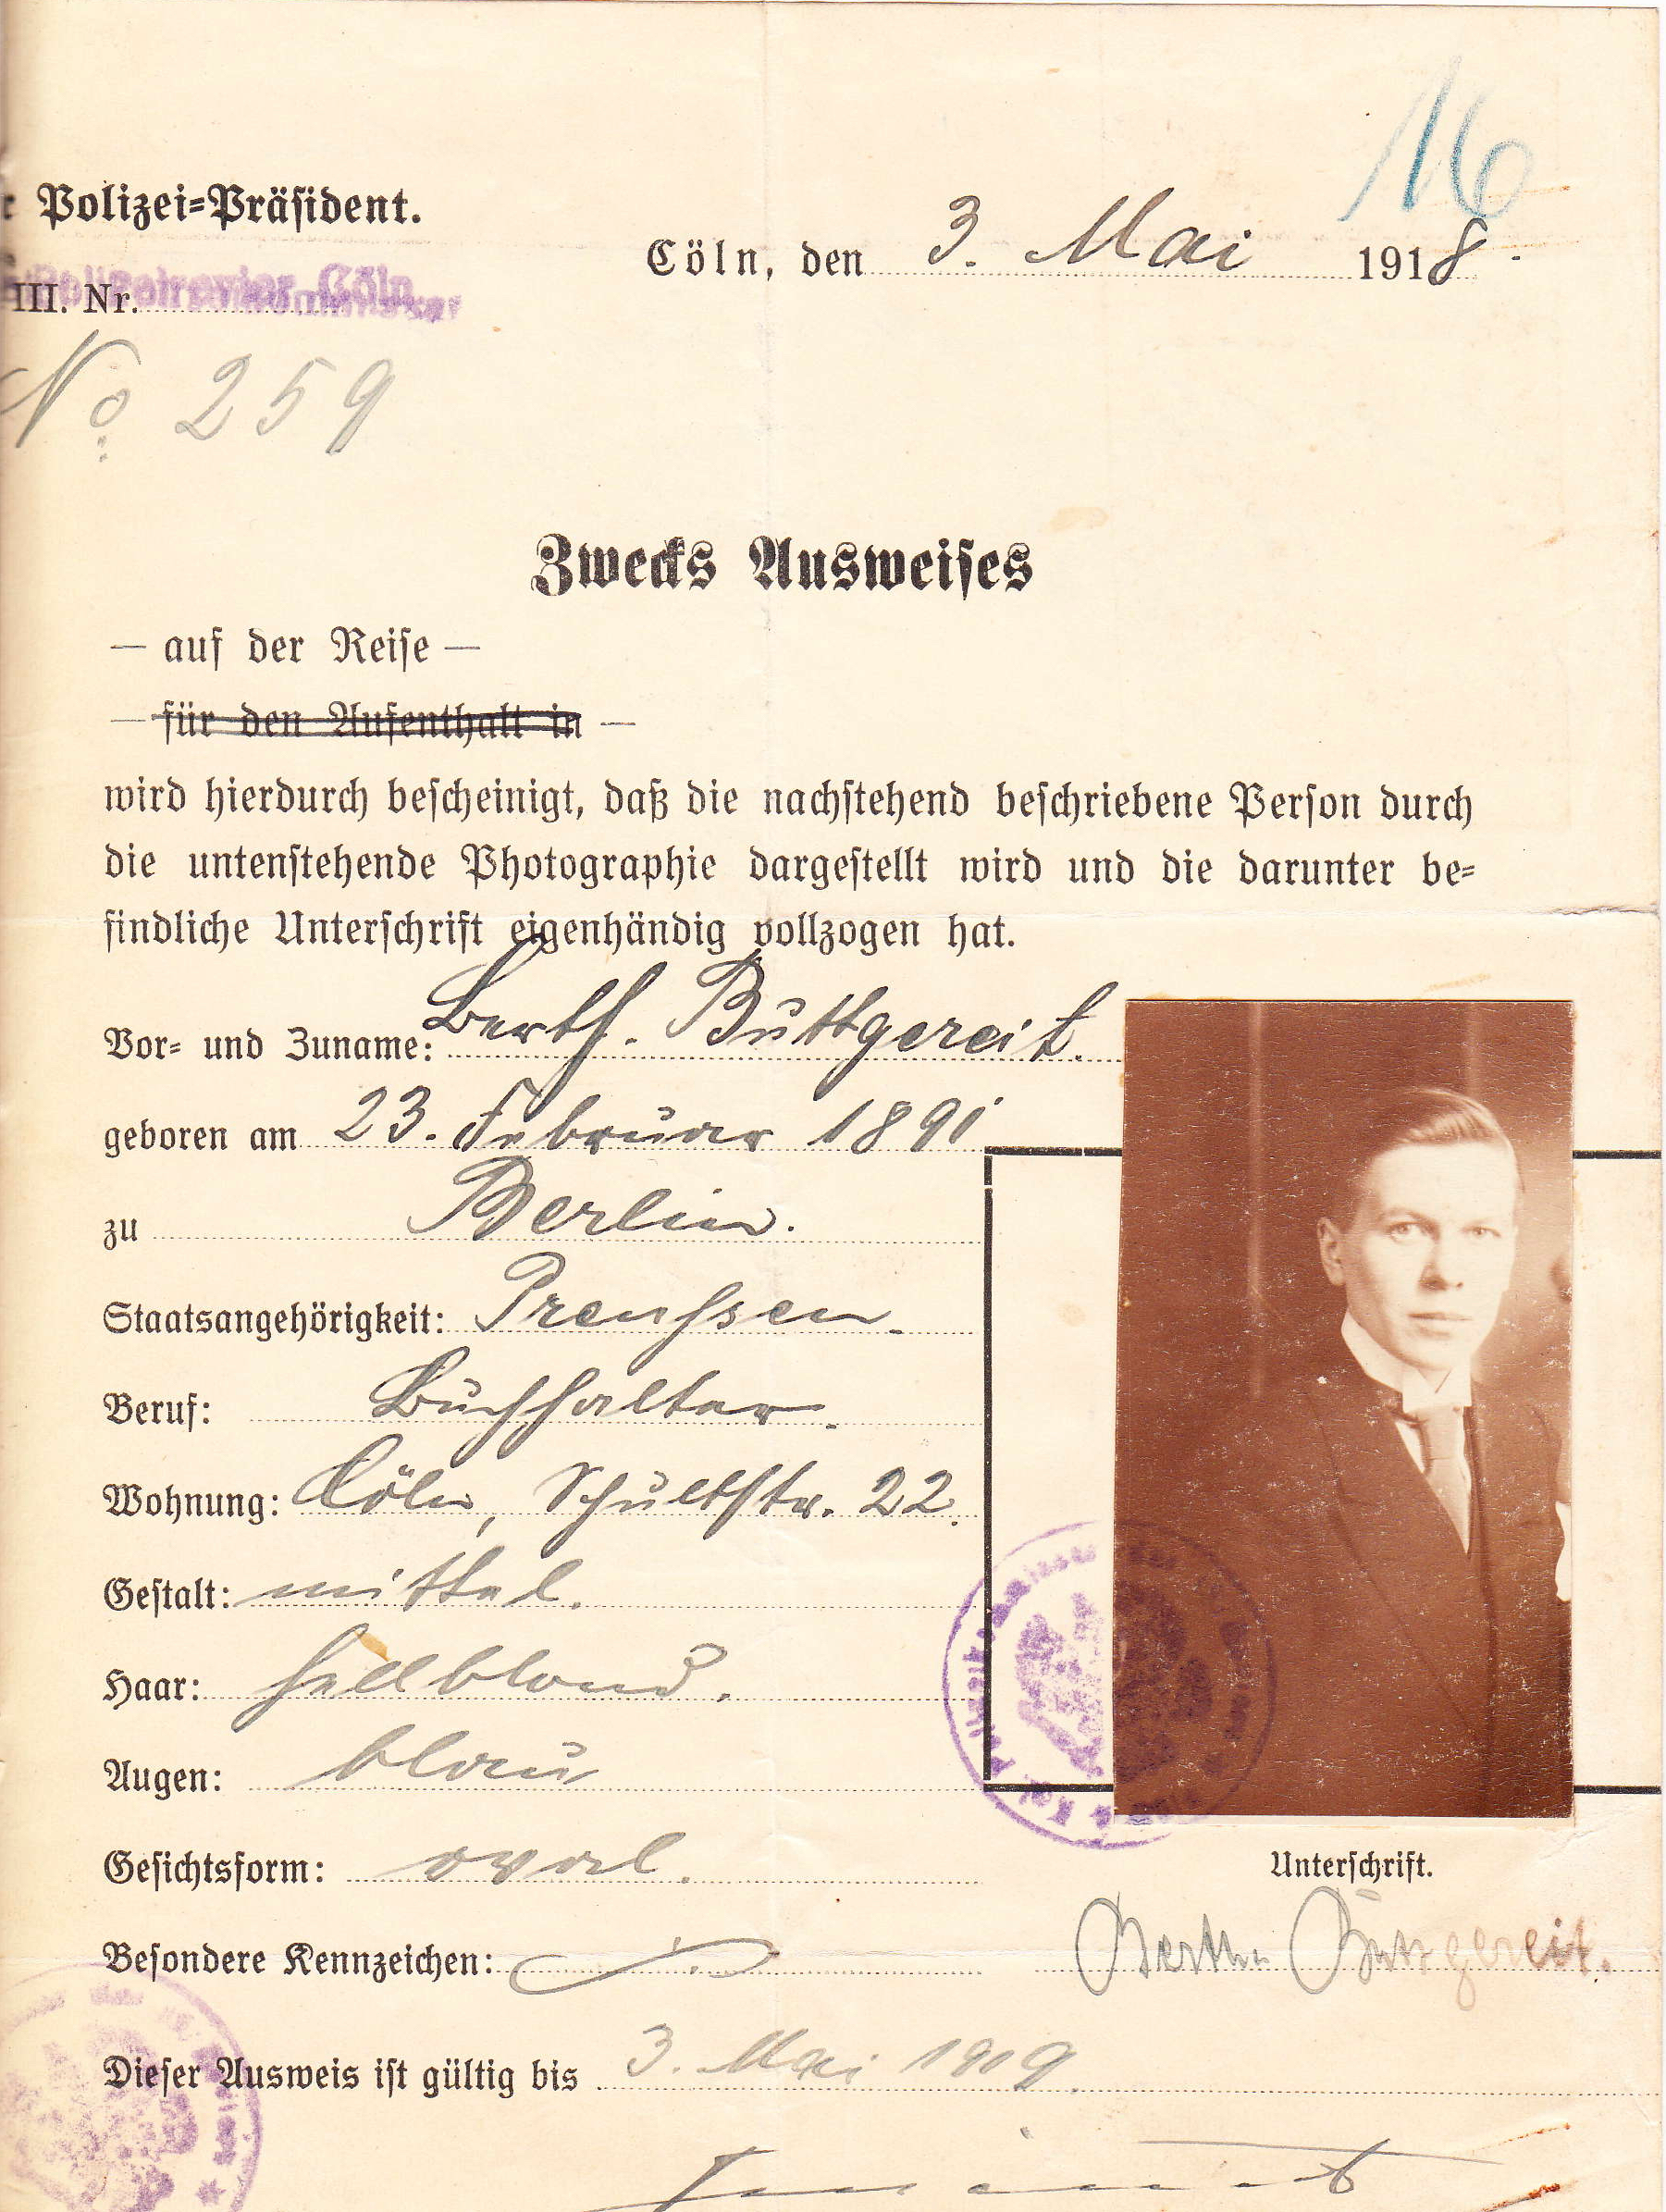 Berthe, later Berthold, Buttgereit's travel pass makes no mention of tranvestitism. But "B.B. is not forbidden to wear man’s clothes" was written on the back. 